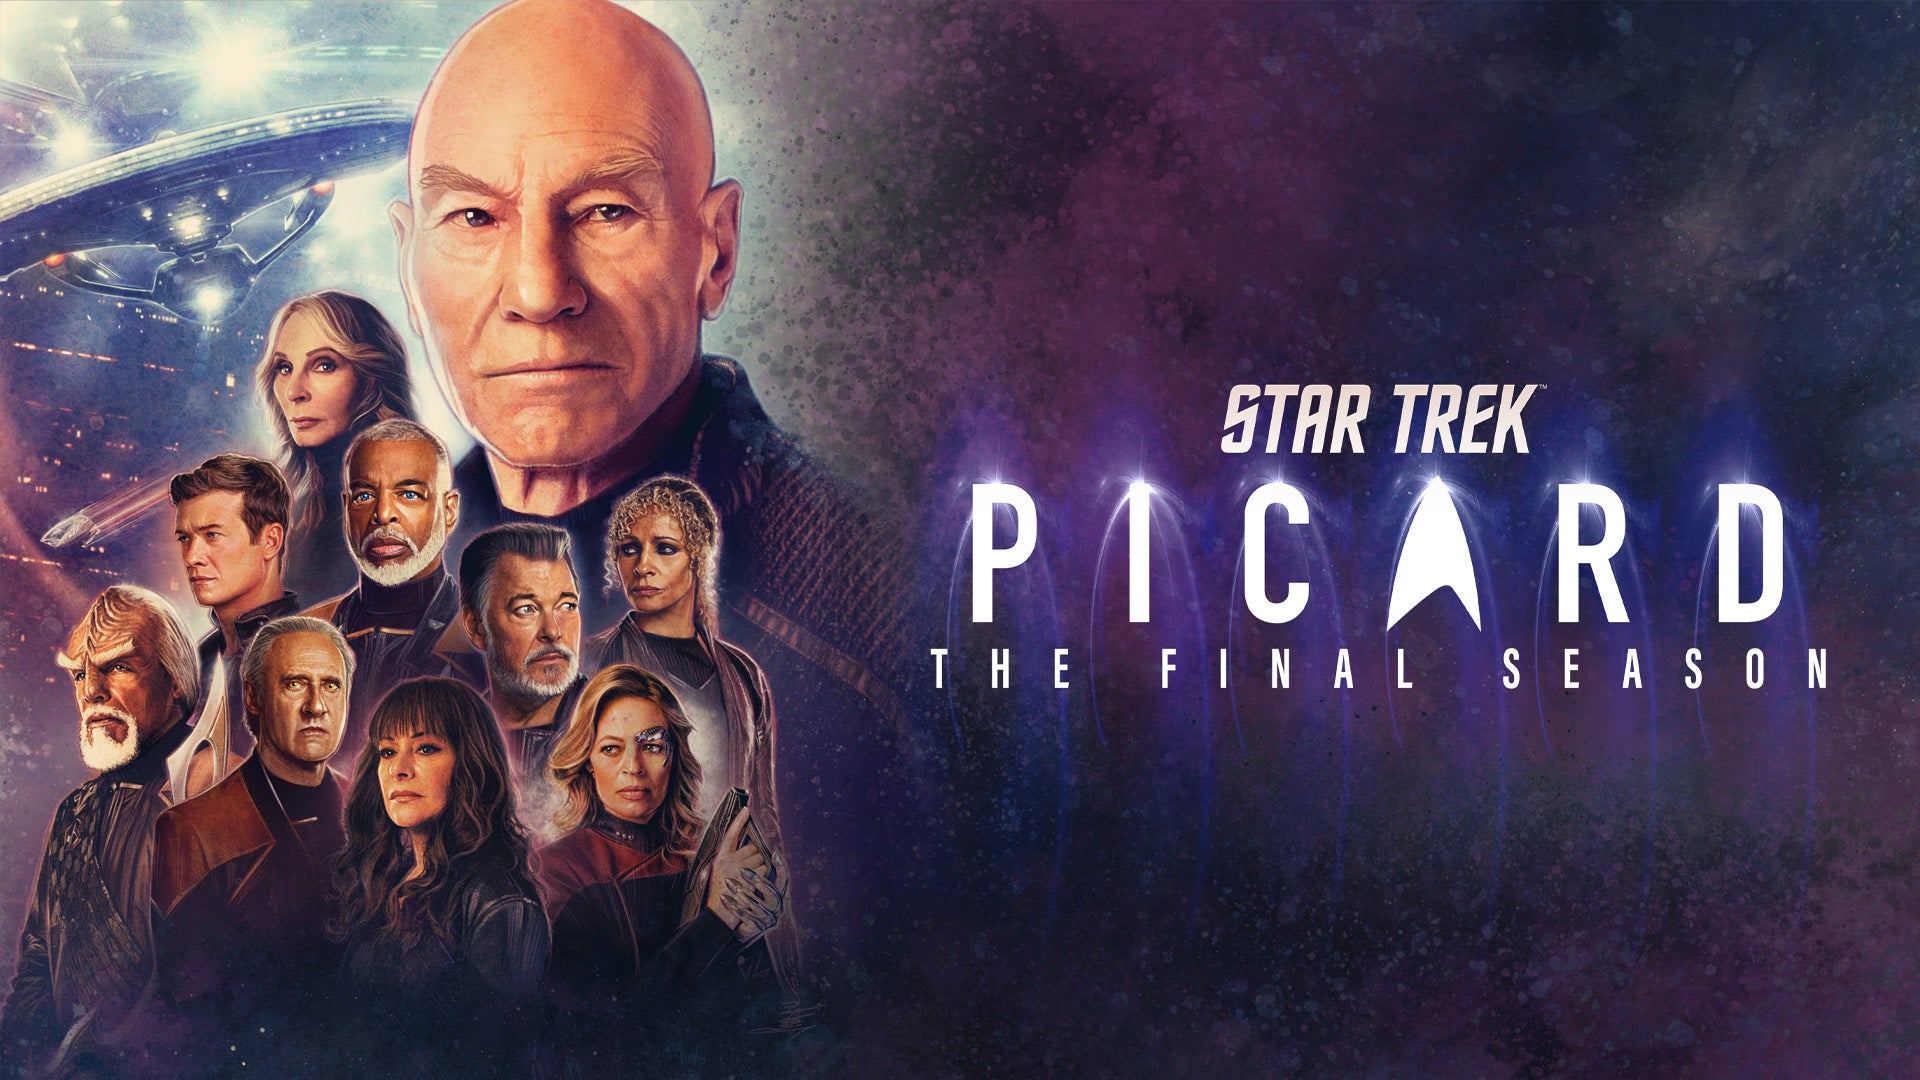 'Picard' S3E1 'The Next Generation' brings back the Riker and Picard magic